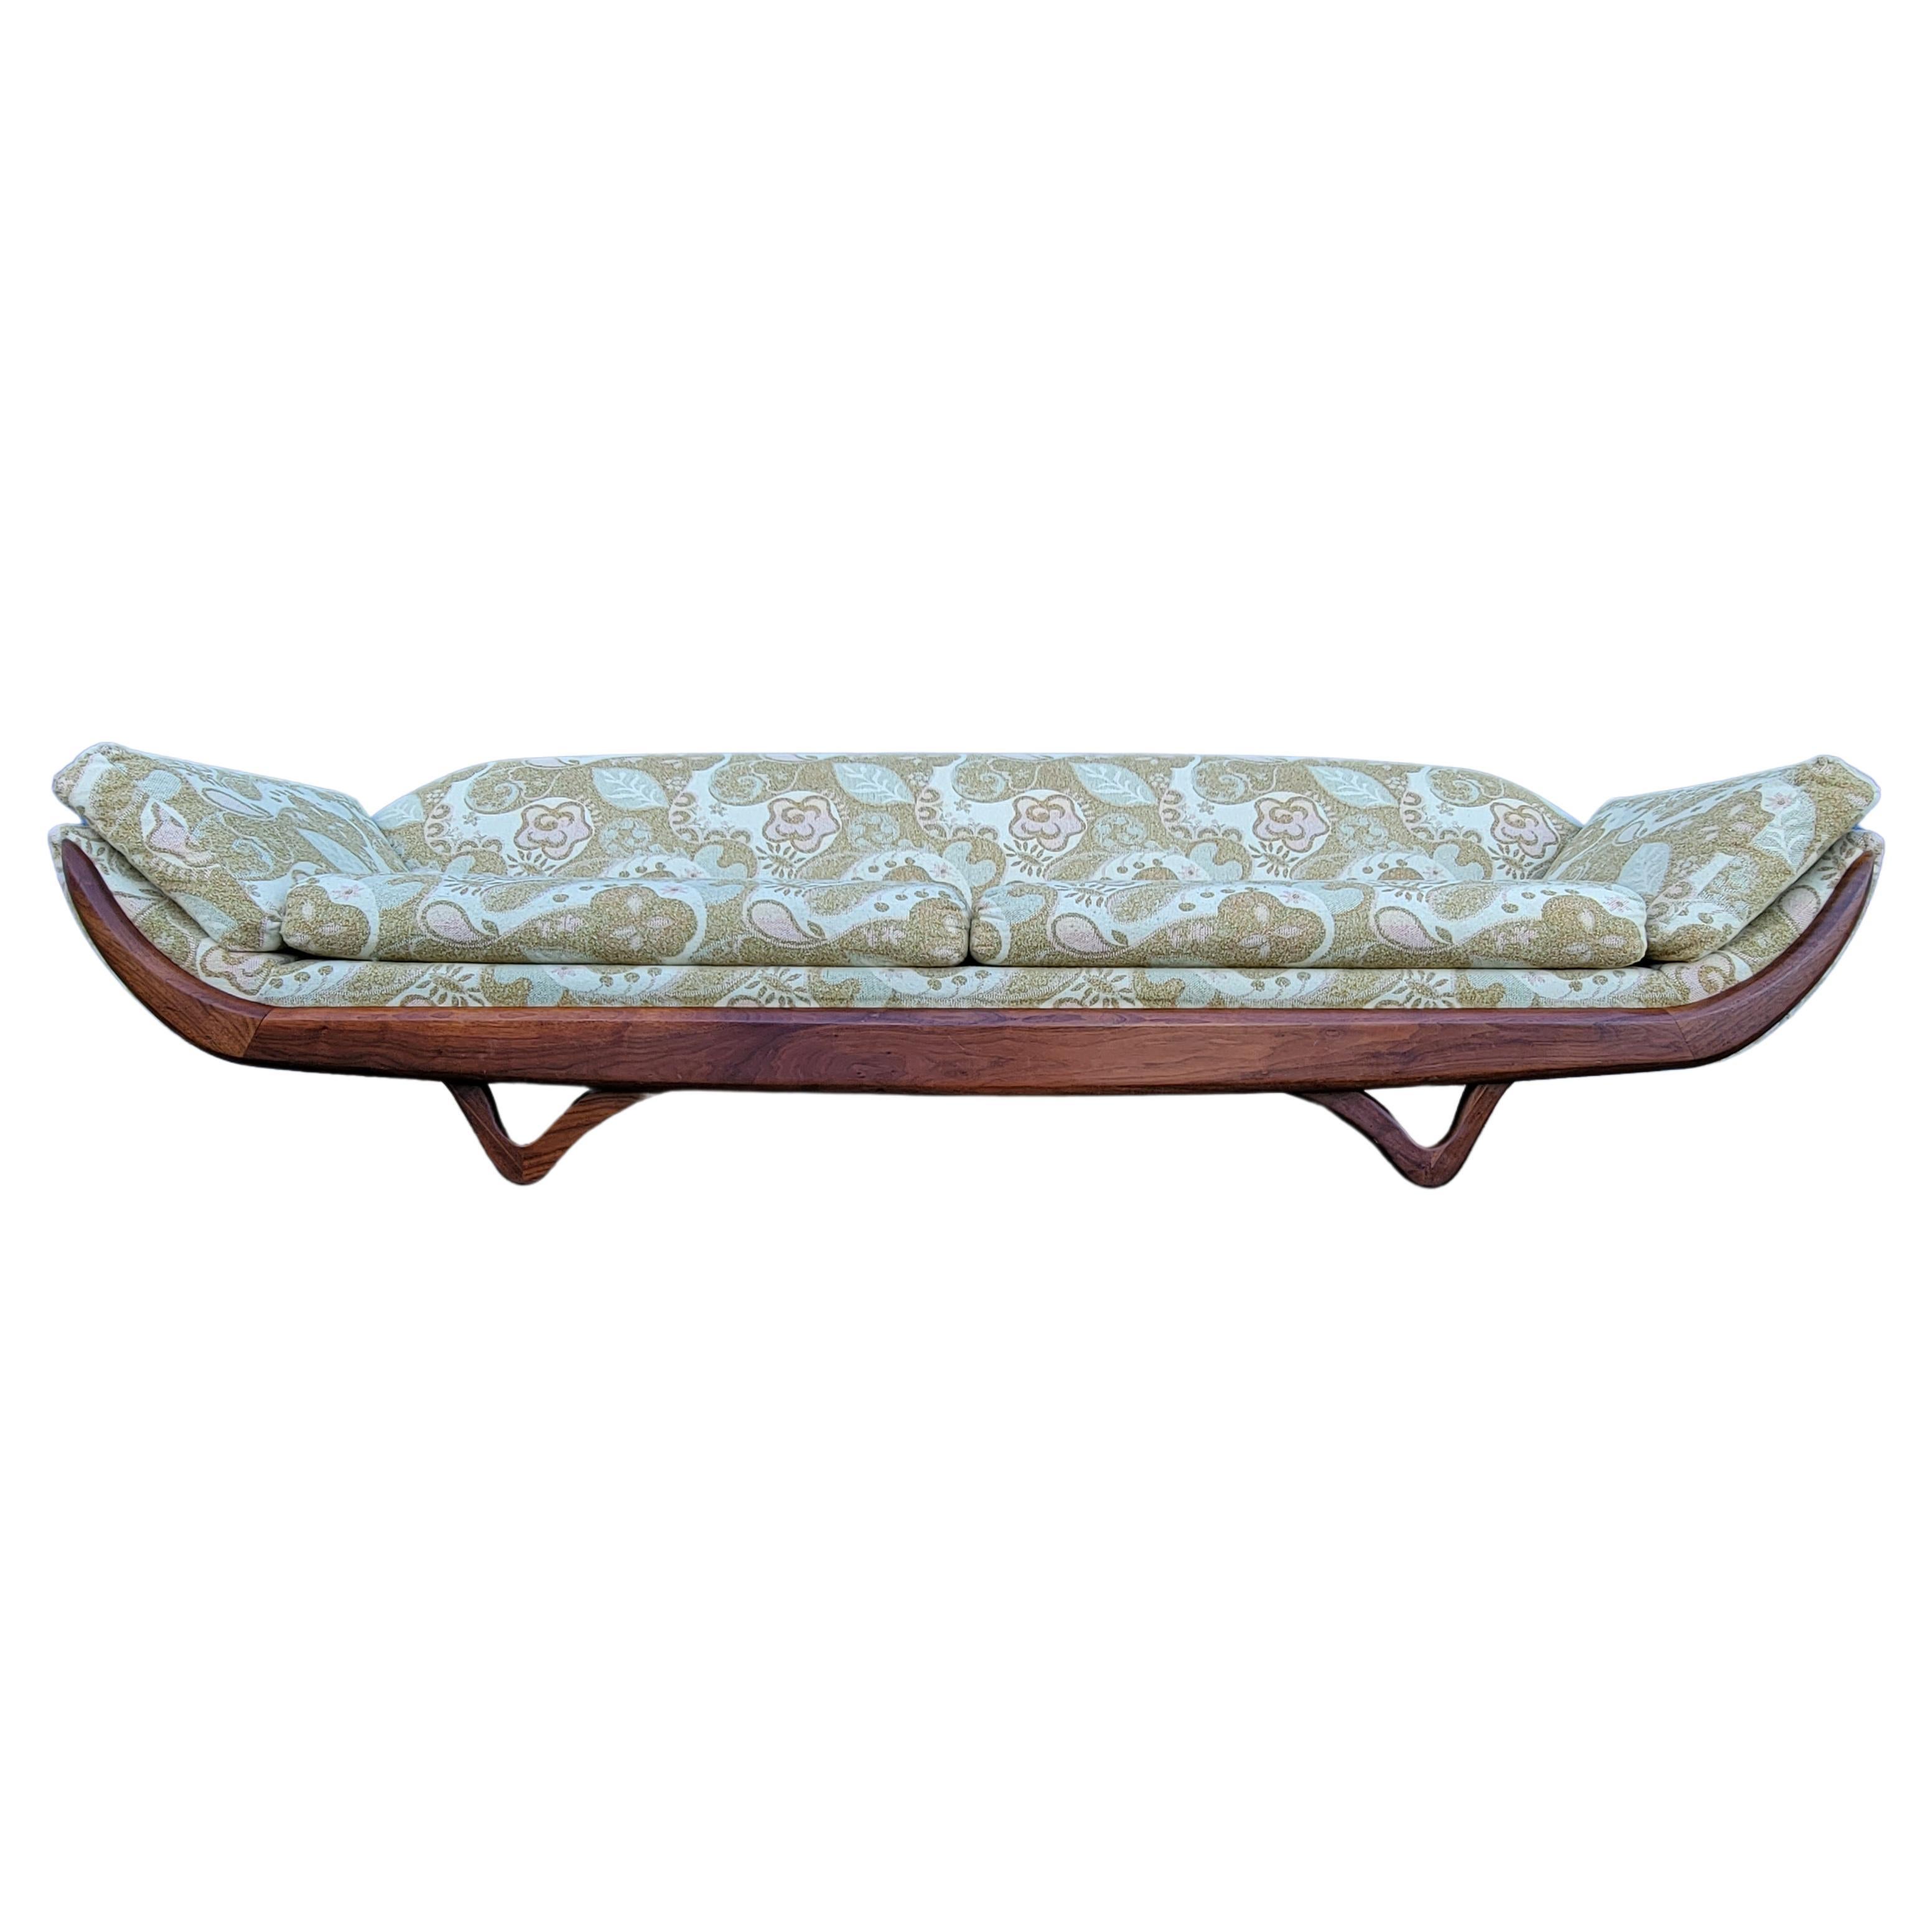 Gondola Sofa by Tempo Manner of Adrian Pearsall